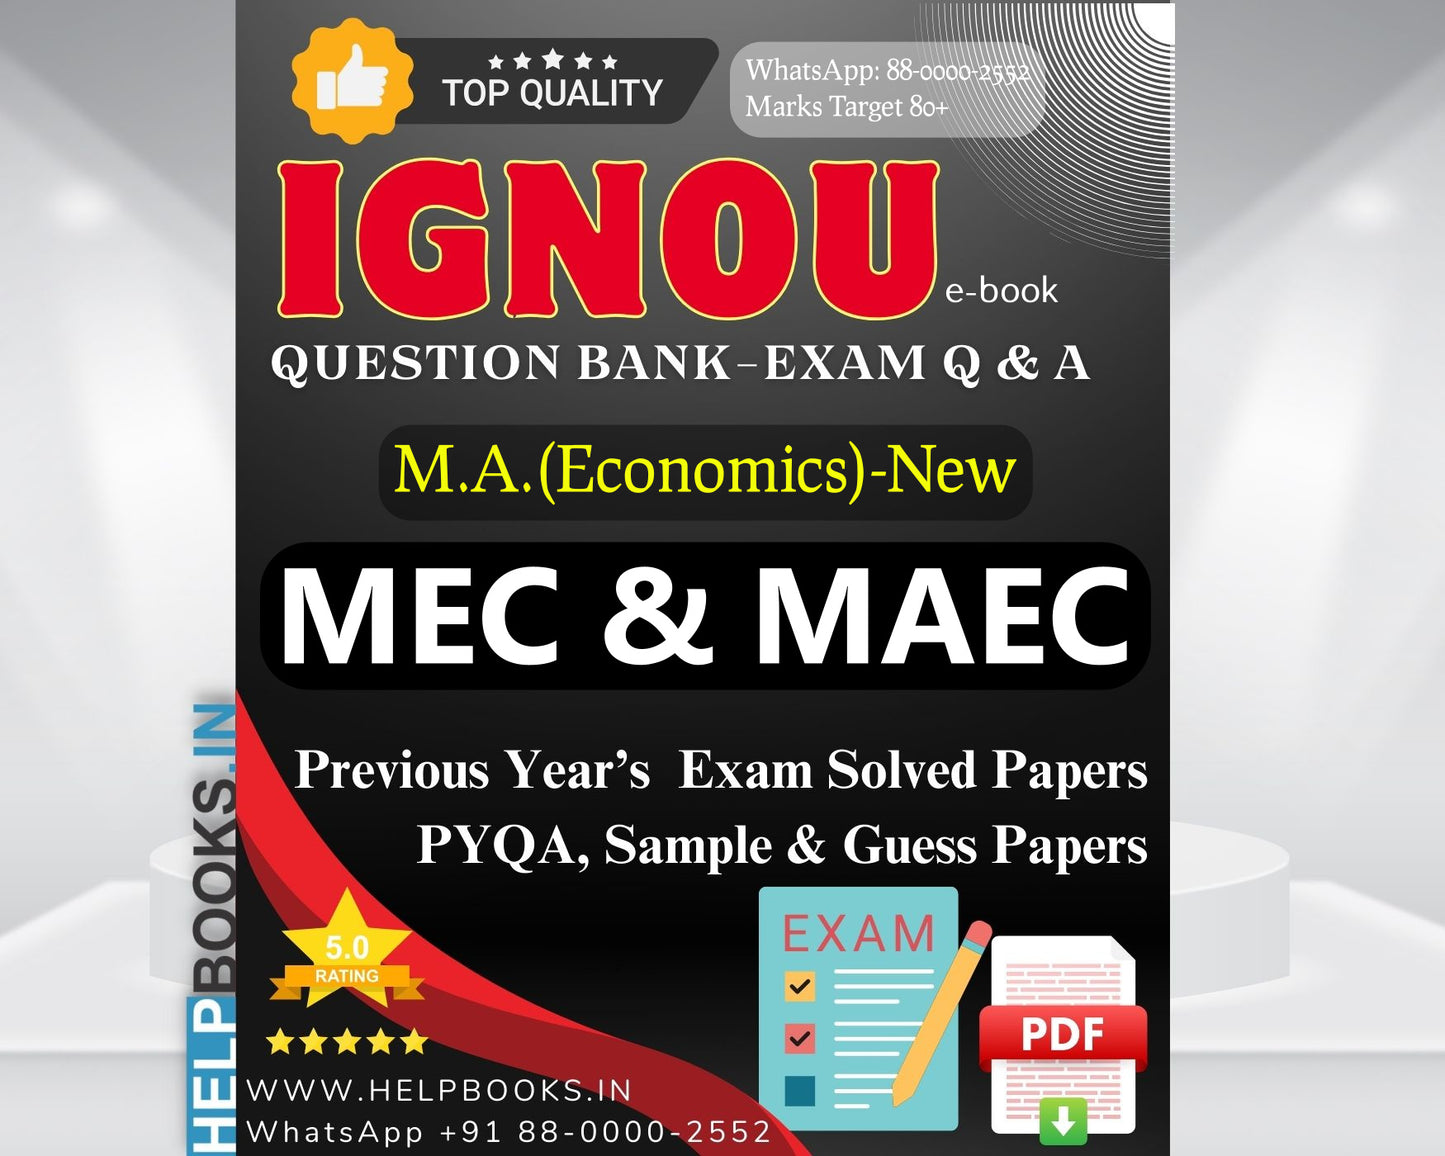 MAEC IGNOU Exam Combo of 10 Solved Papers: 5 Previous Years' Solved Papers & 5 Sample Guess Papers for Master of Arts Economics